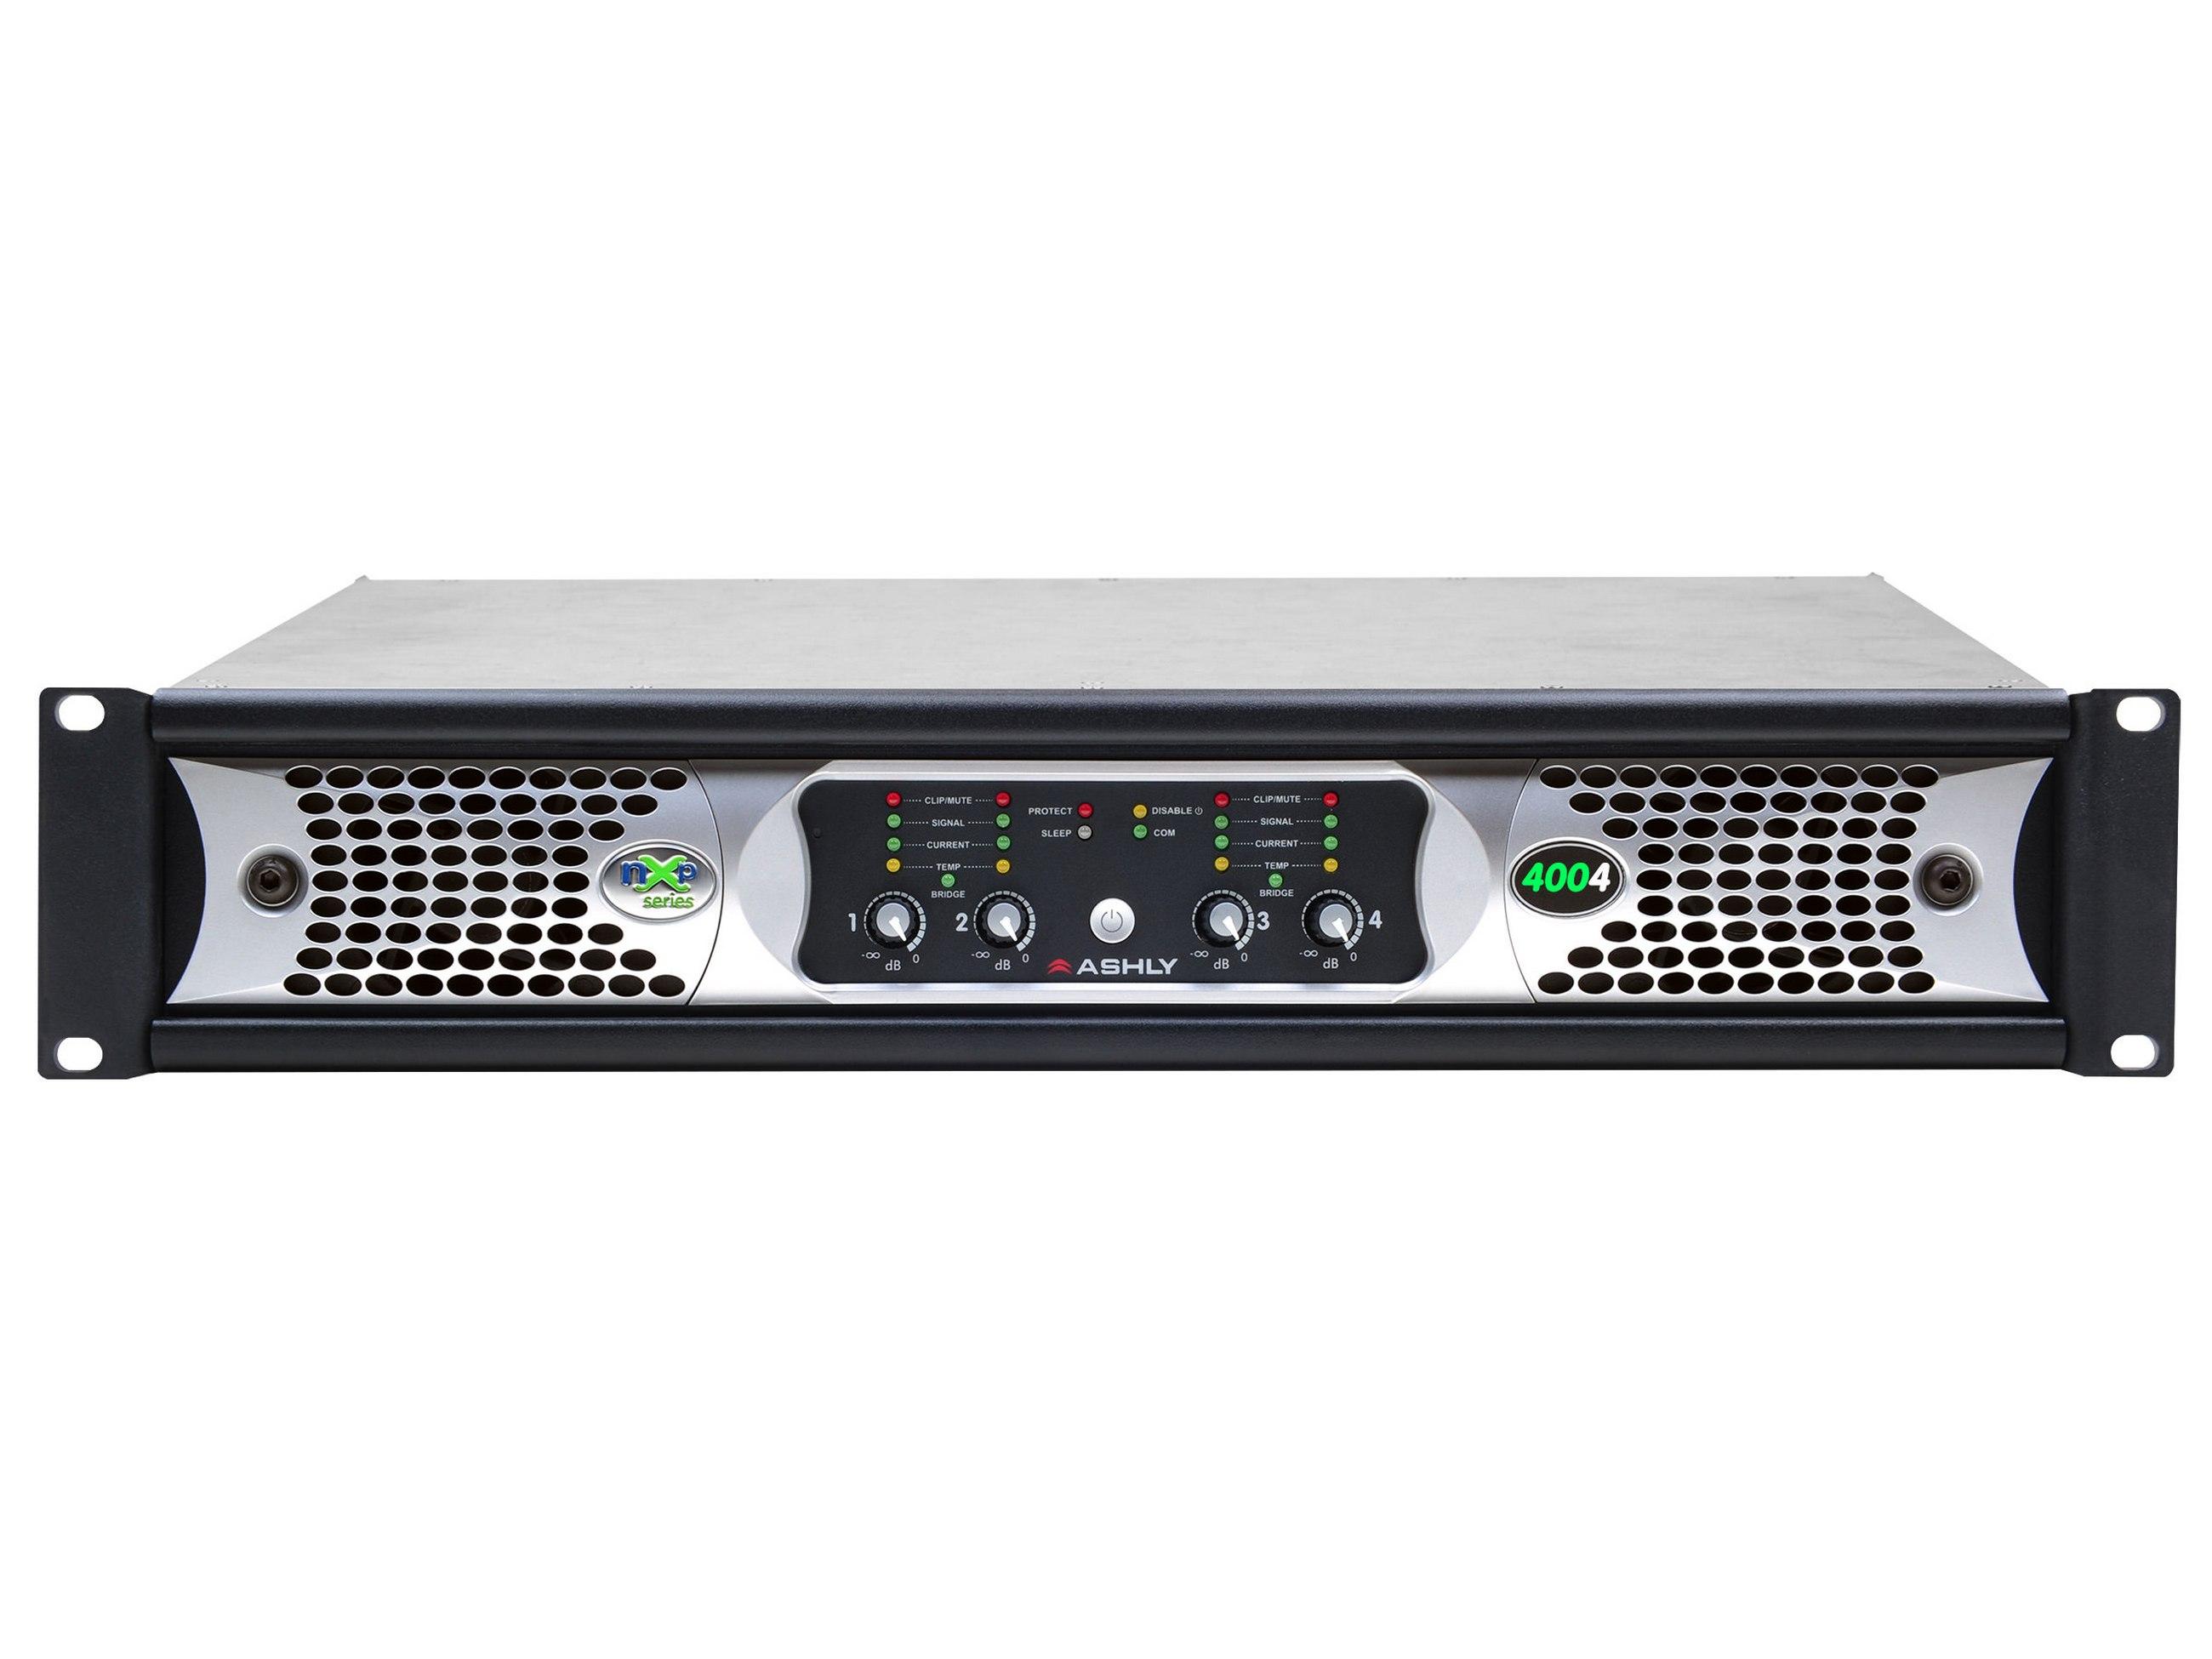 nXp4004d 4x 400 Watts/2 Ohms Network Power Amplifier with Protea DSP and OPDante Option Card by Ashly